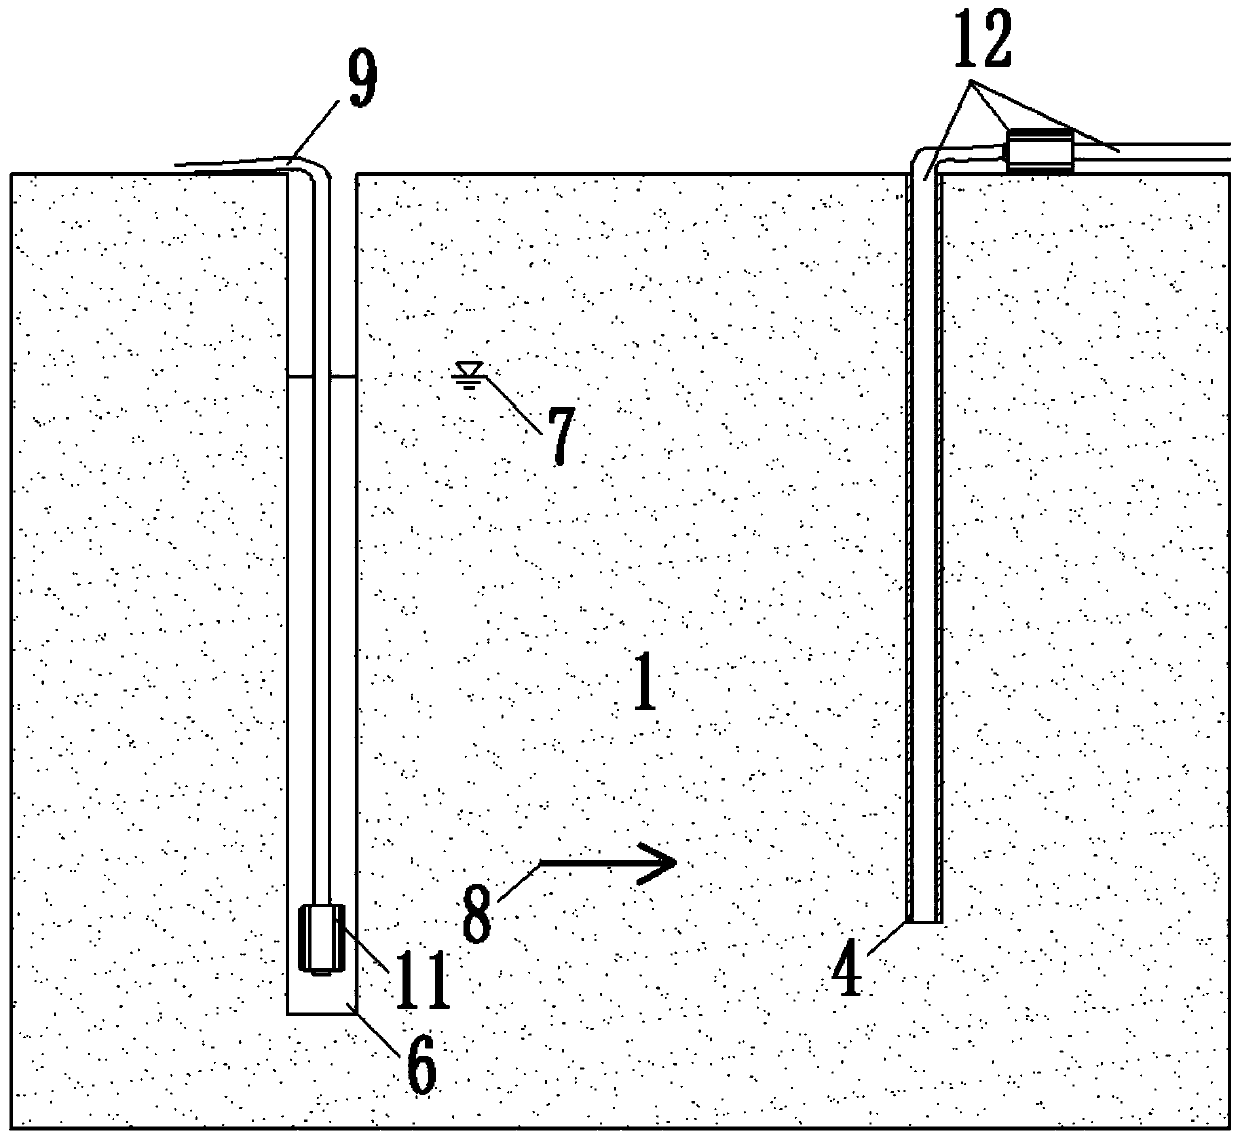 Induced-type grouting construction method